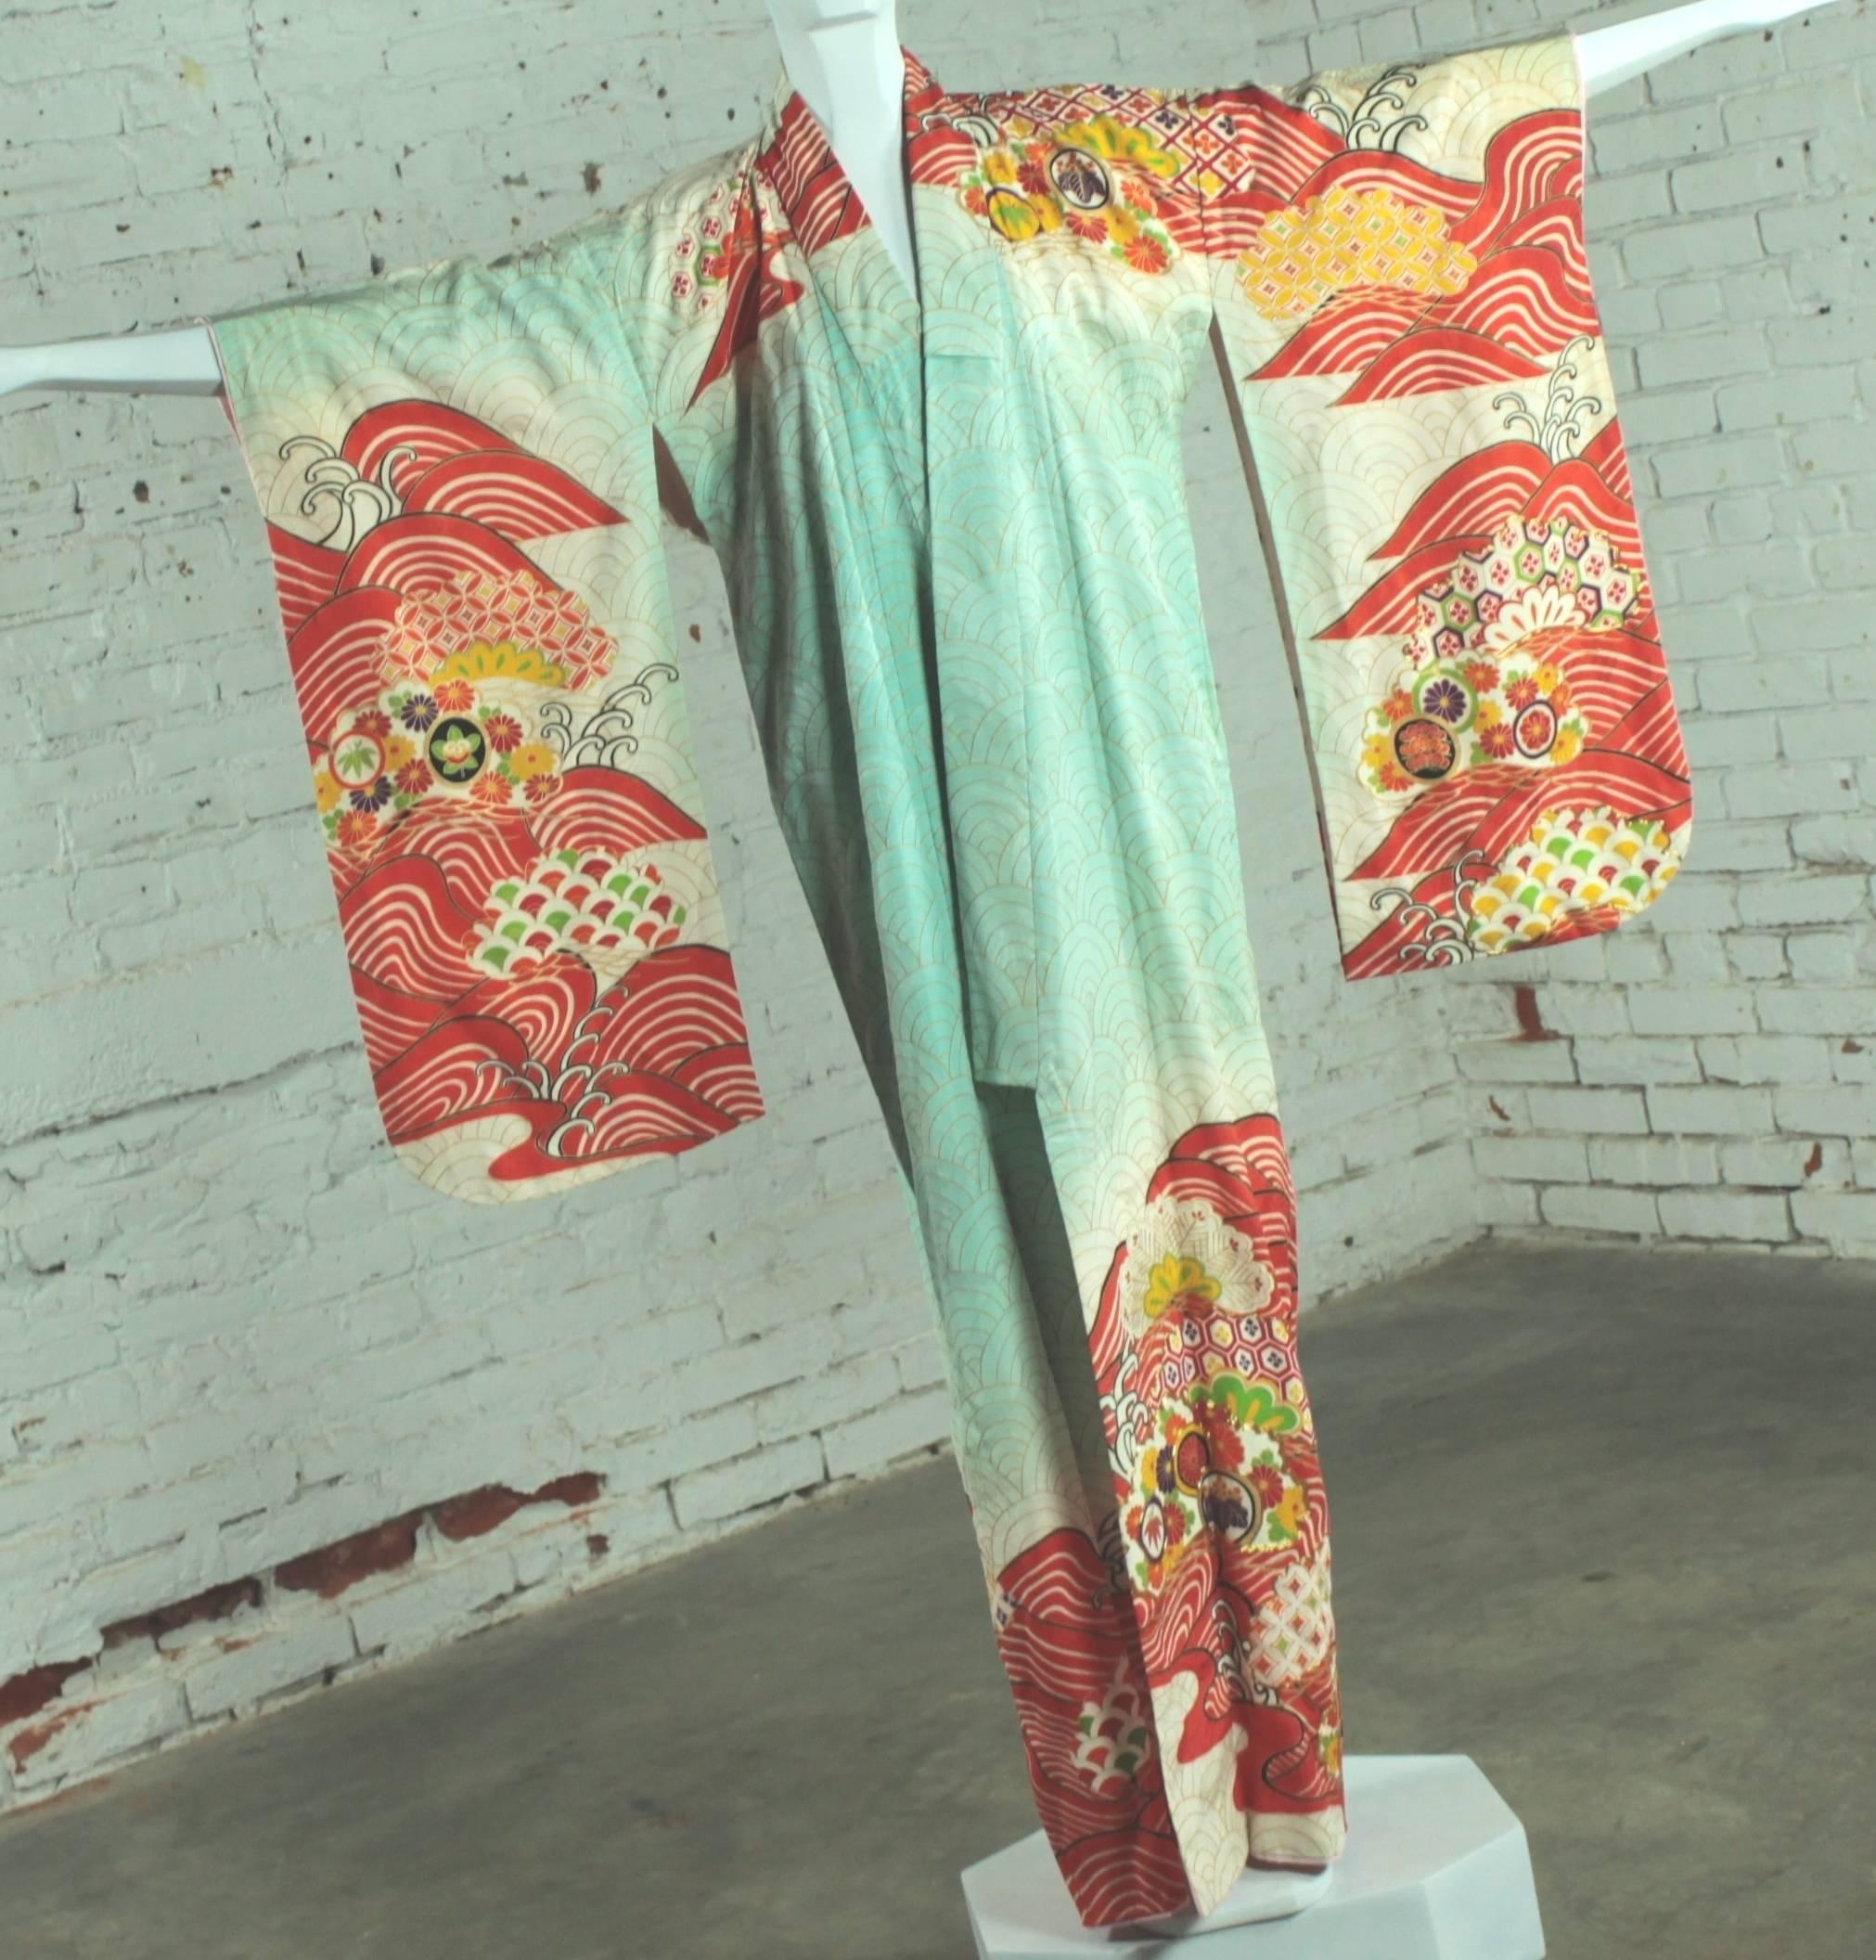 Gorgeous vintage silk full length Japanese kimono in turquoise, orange, red, yellow, green, gold and purple. It is in wonderful wearable condition.

This wearable work of art is incredible! Gorgeous Japanese full length kimono in vibrant turquoise